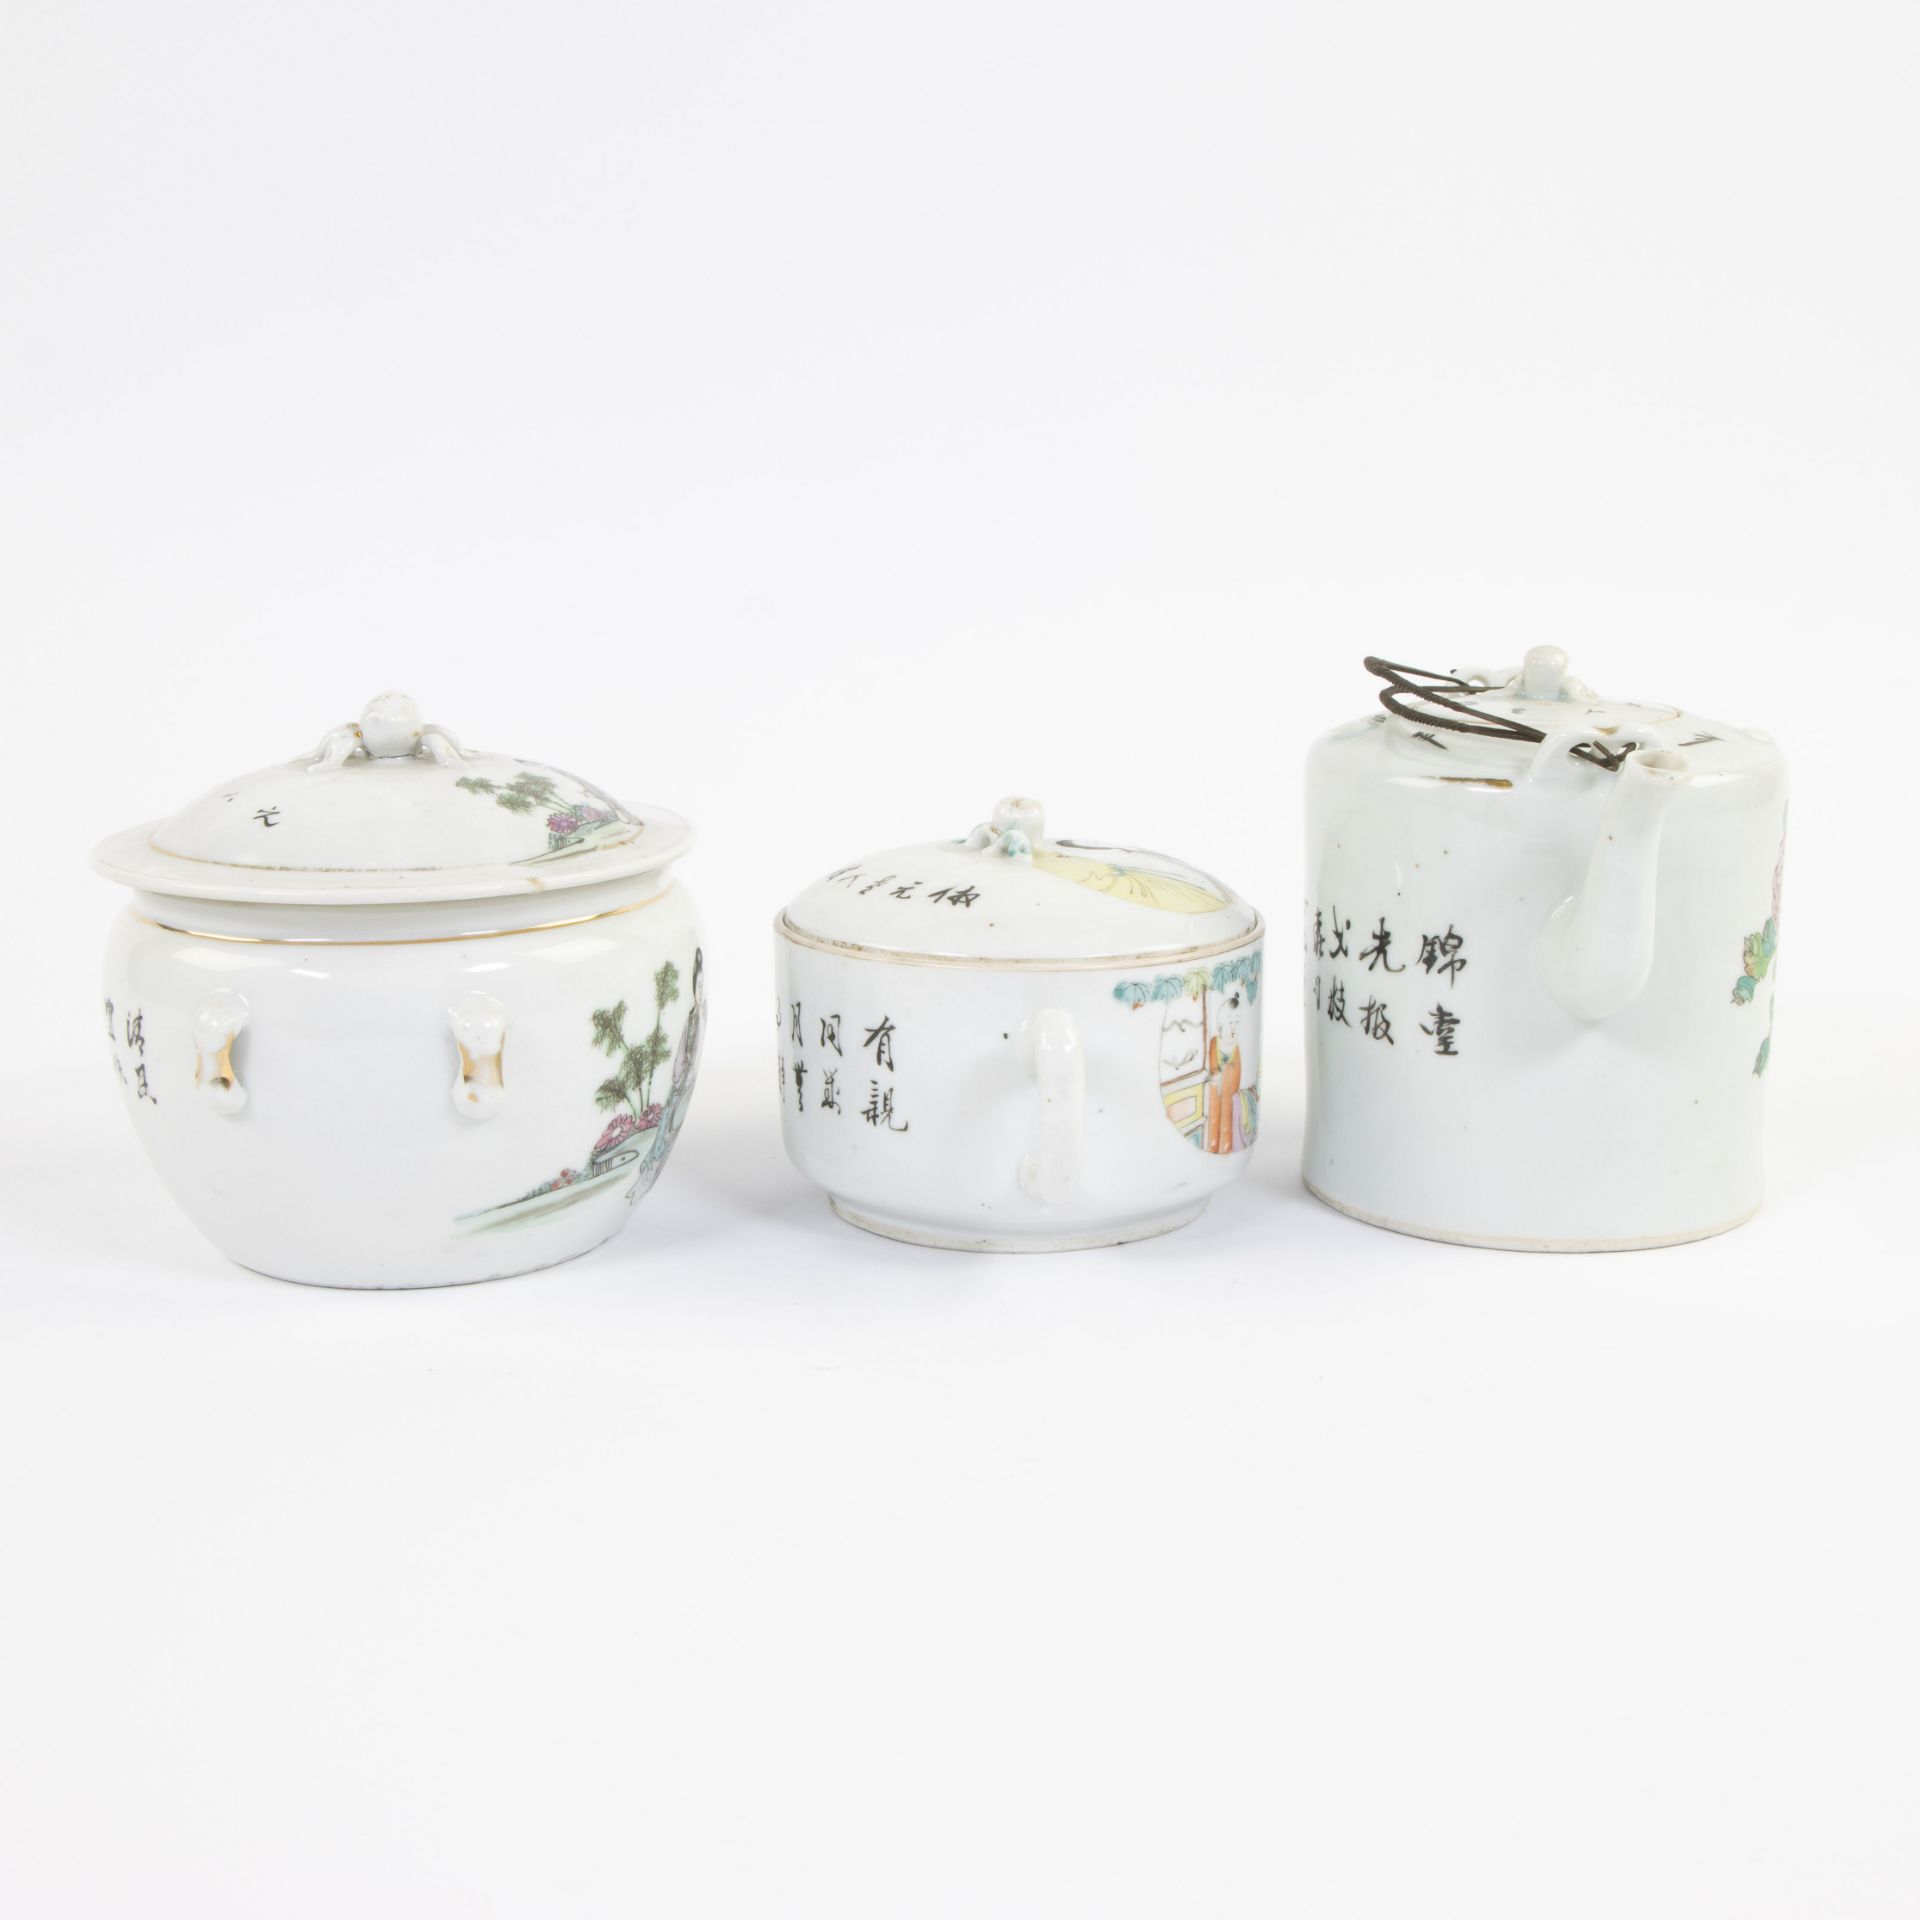 Collection of Chinese porcelain: 2 teapots and lidded bowl - Image 4 of 7